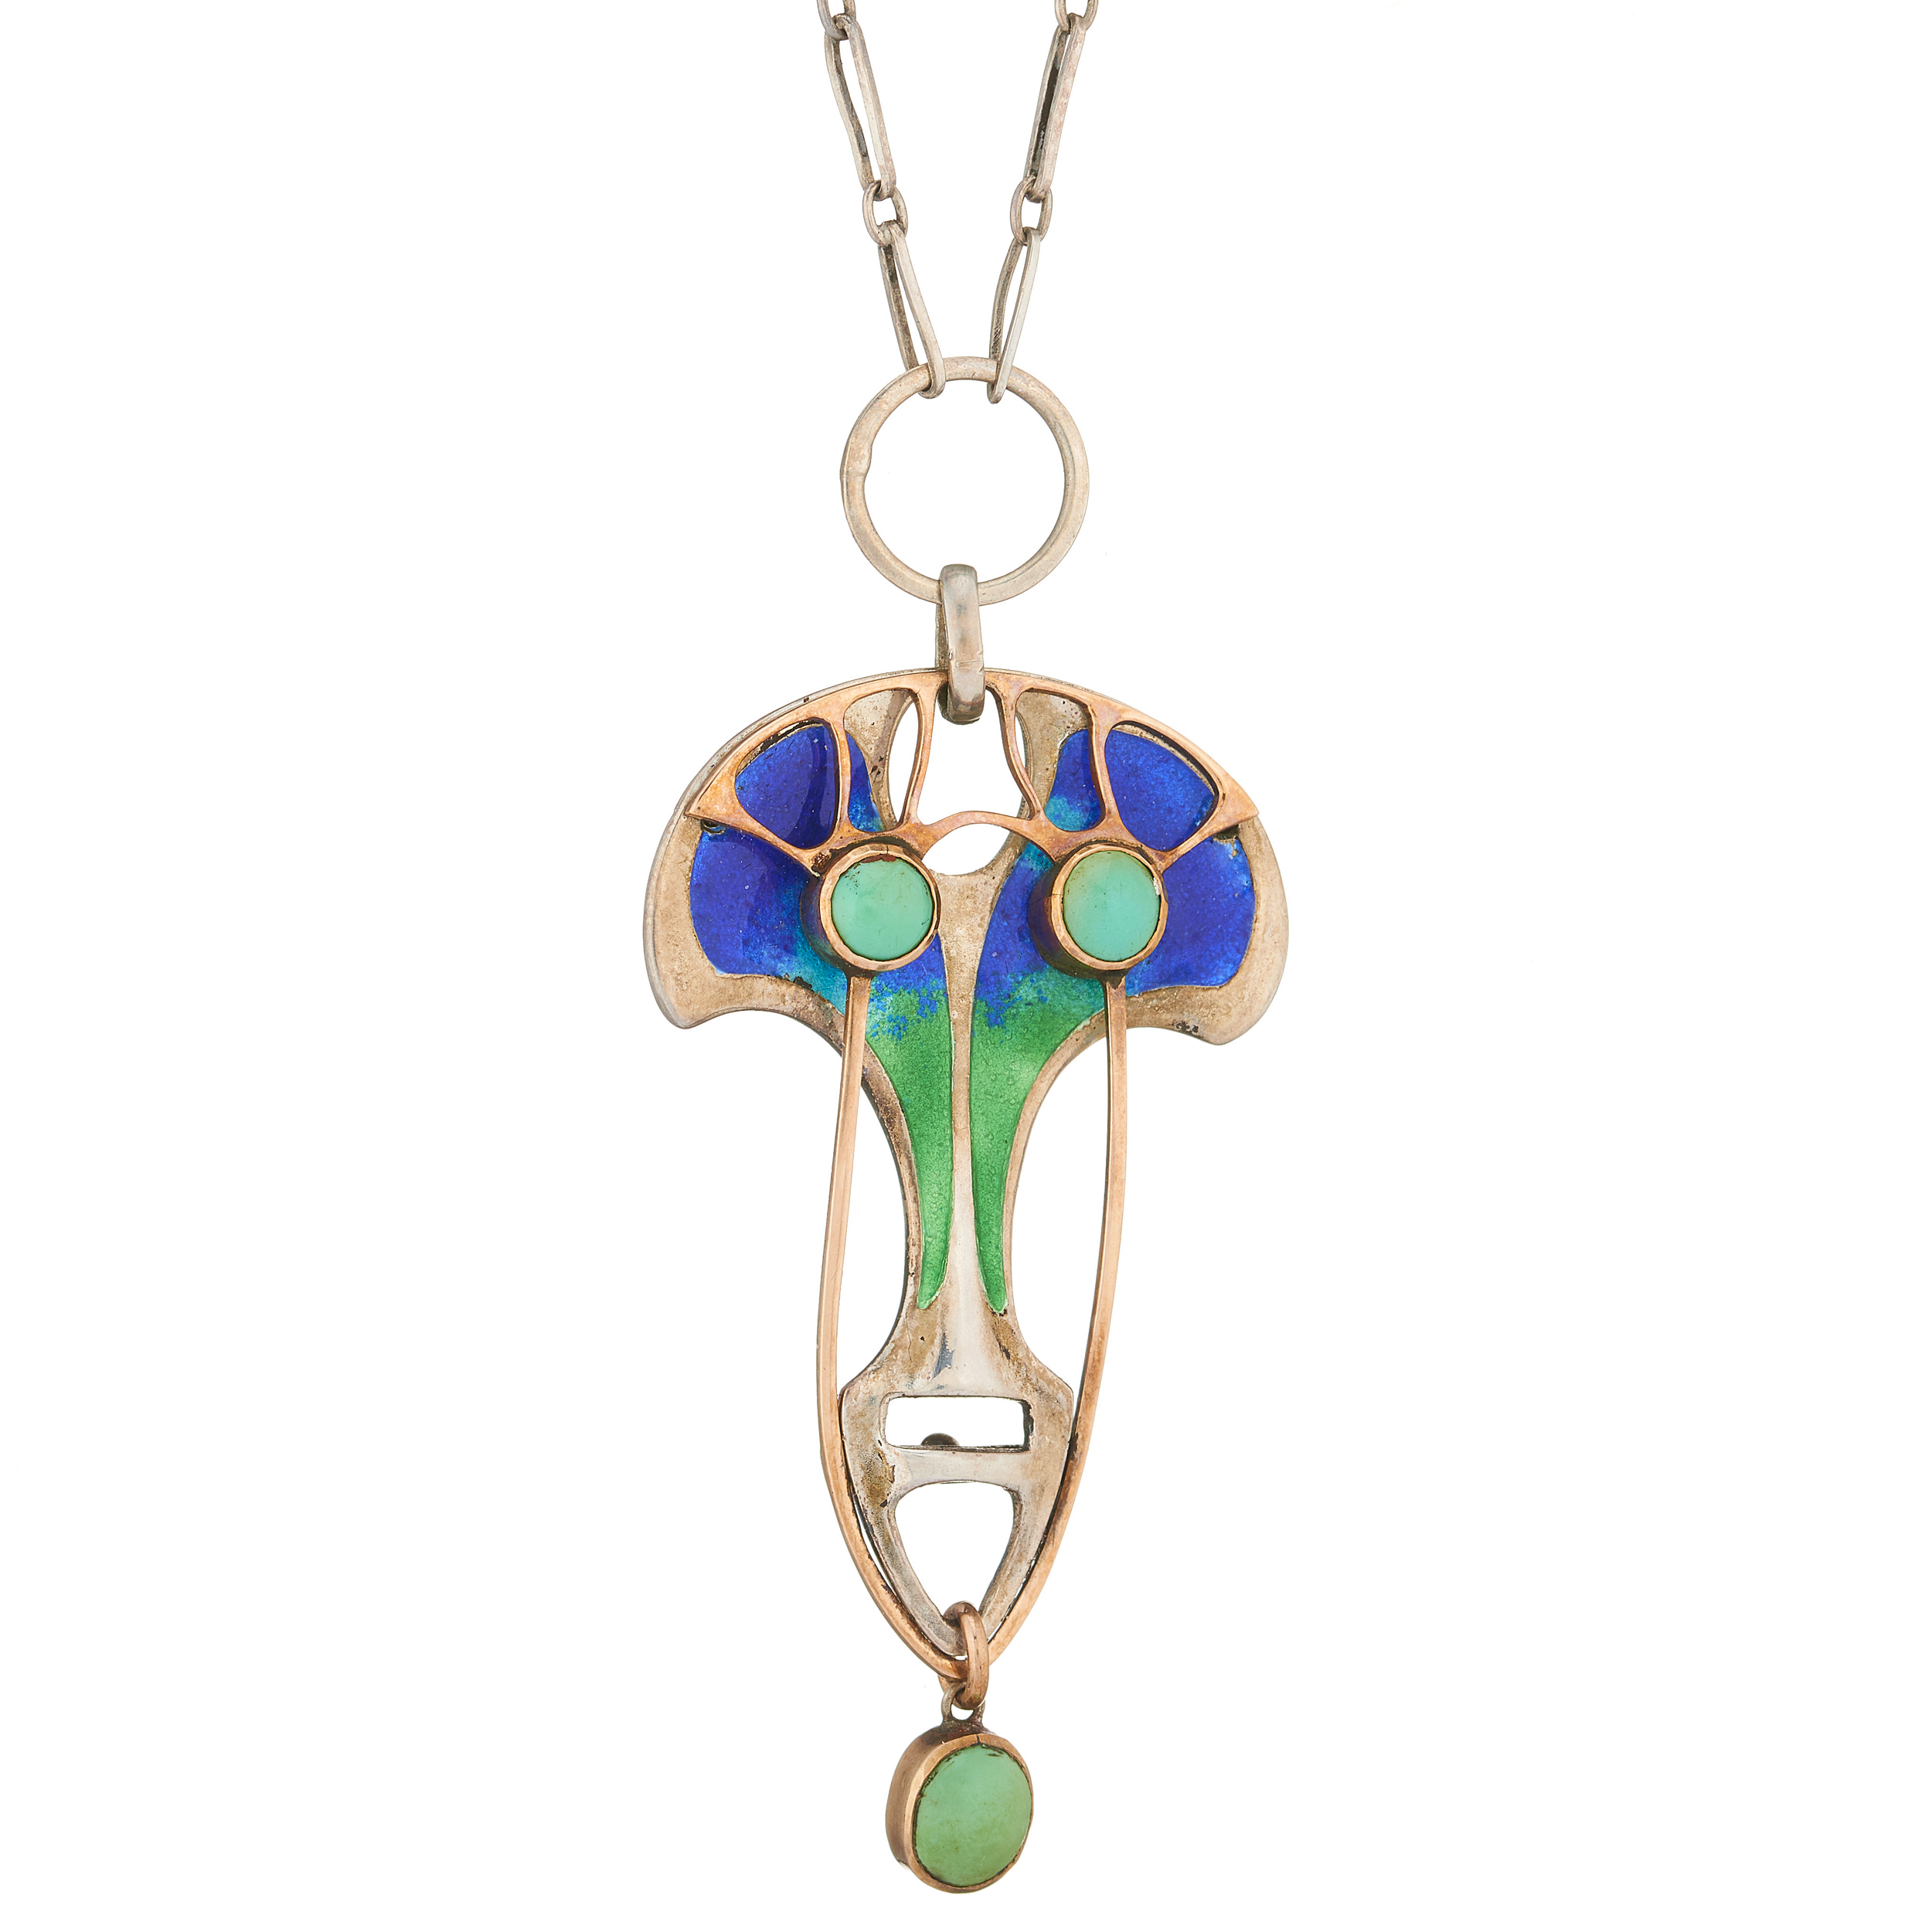 Theodor Fahrner for Murrle Bennett, an Art Nouveau silver and gold, turquoise and enamel necklace